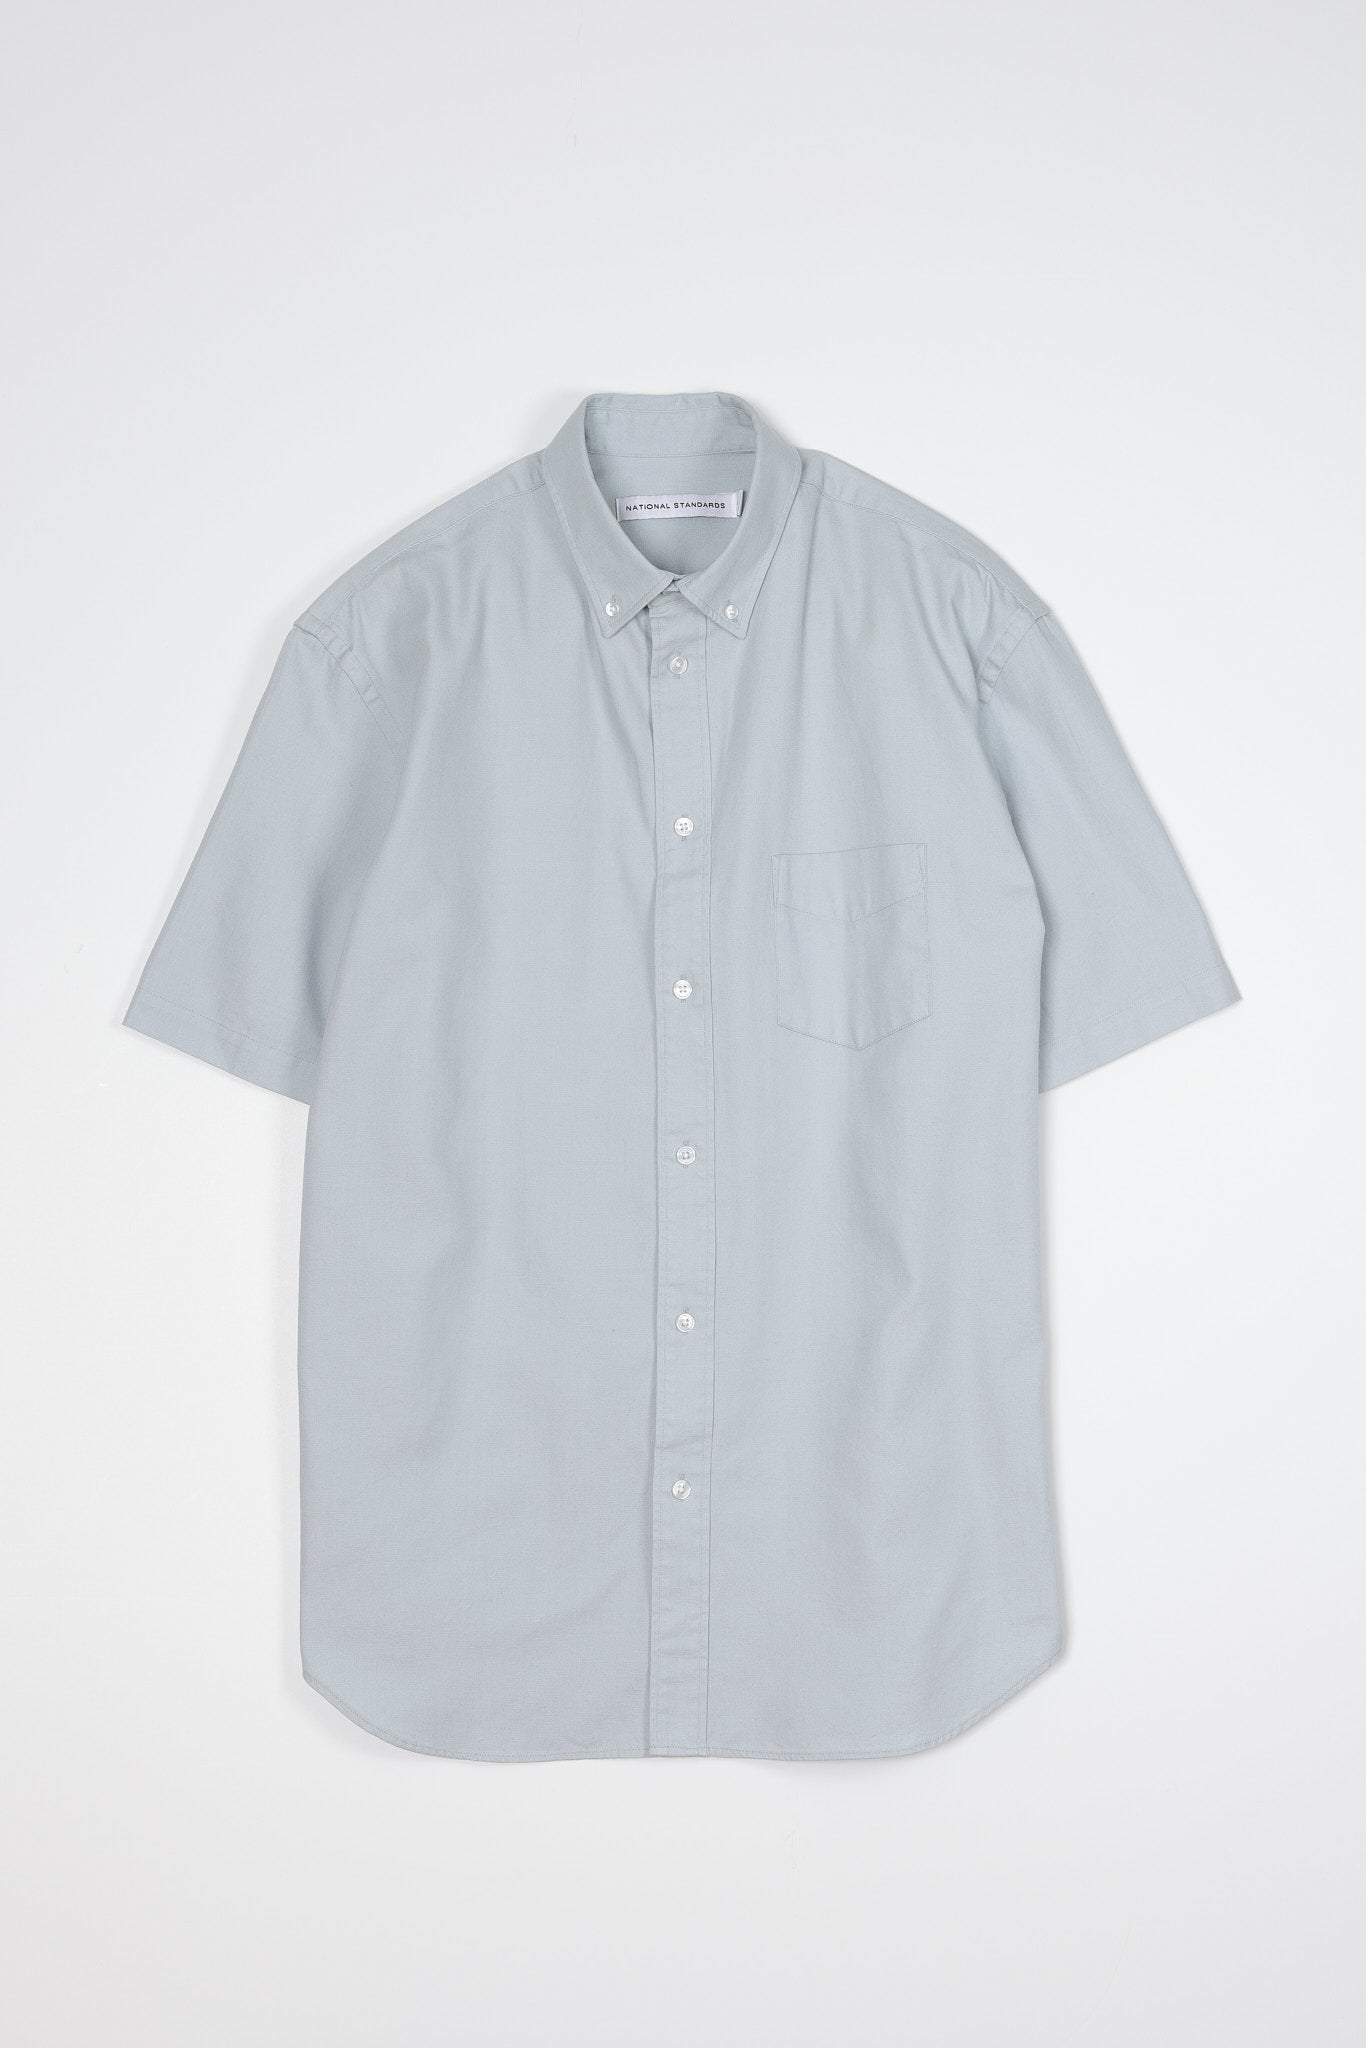 Japanese Washed Oxford in Light Blue 01